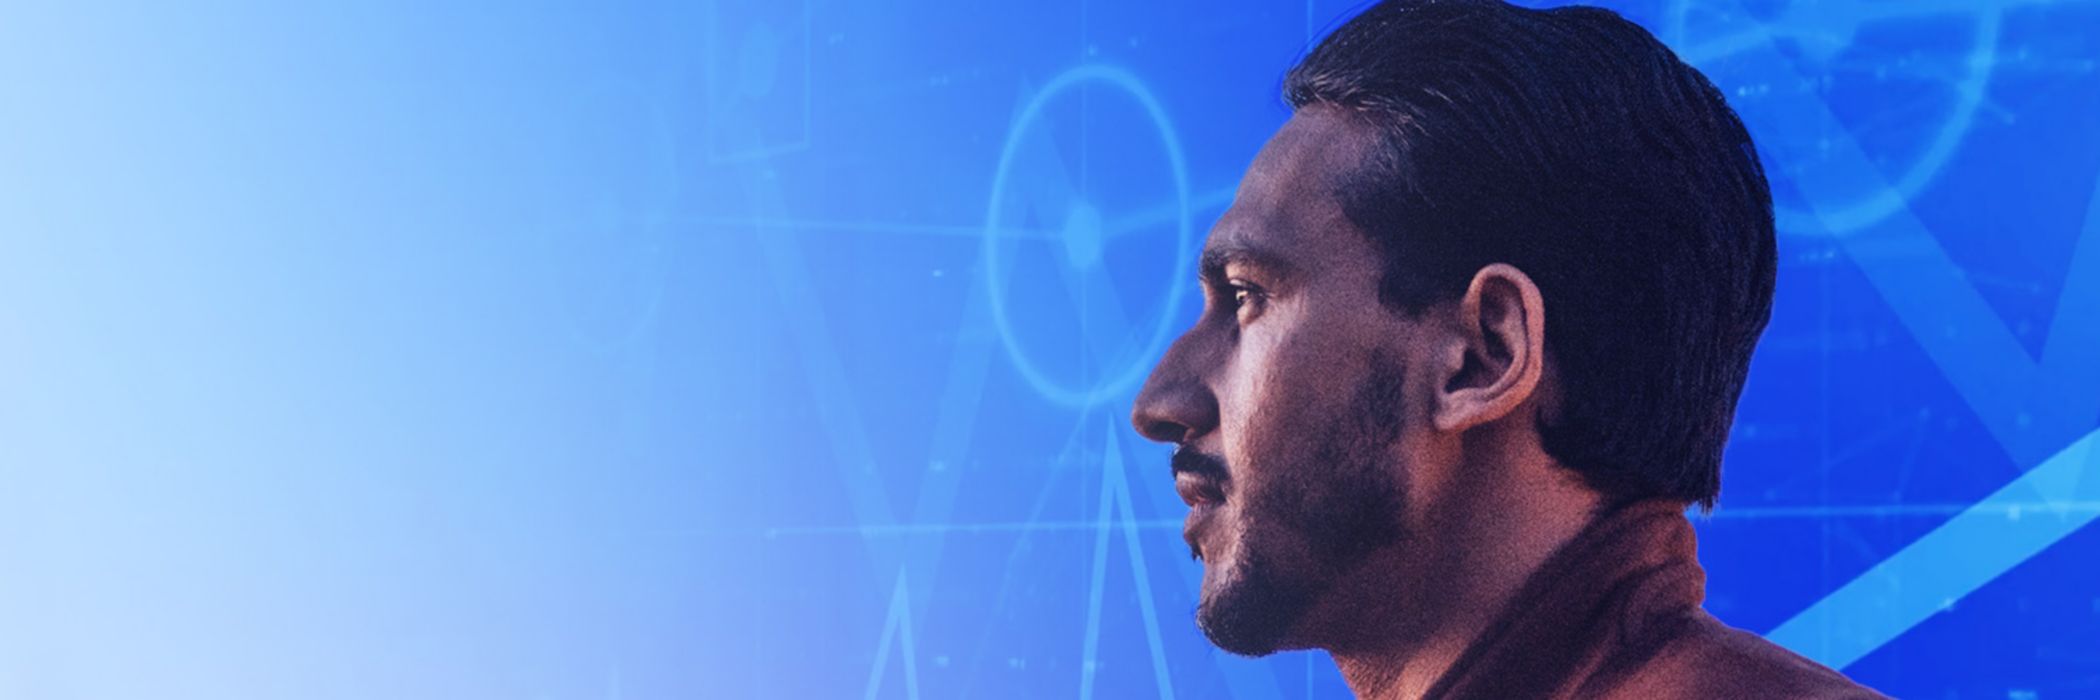 Side profile of man with data points moving behind